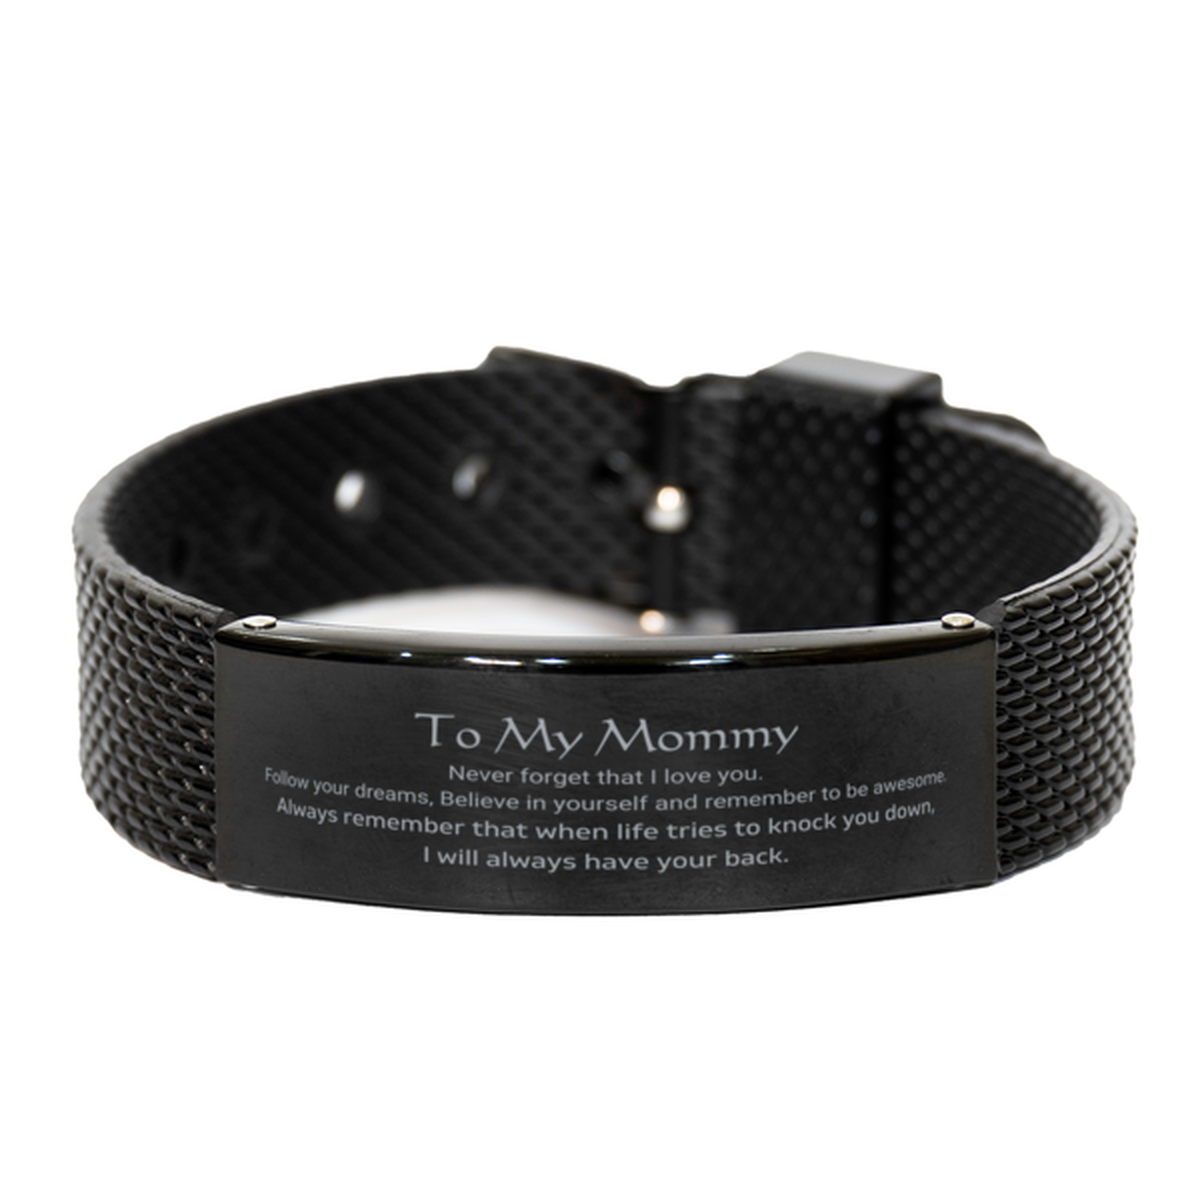 Inspirational Gifts for Mommy, Follow your dreams, Believe in yourself, Mommy Black Shark Mesh Bracelet, Birthday Christmas Unique Gifts For Mommy